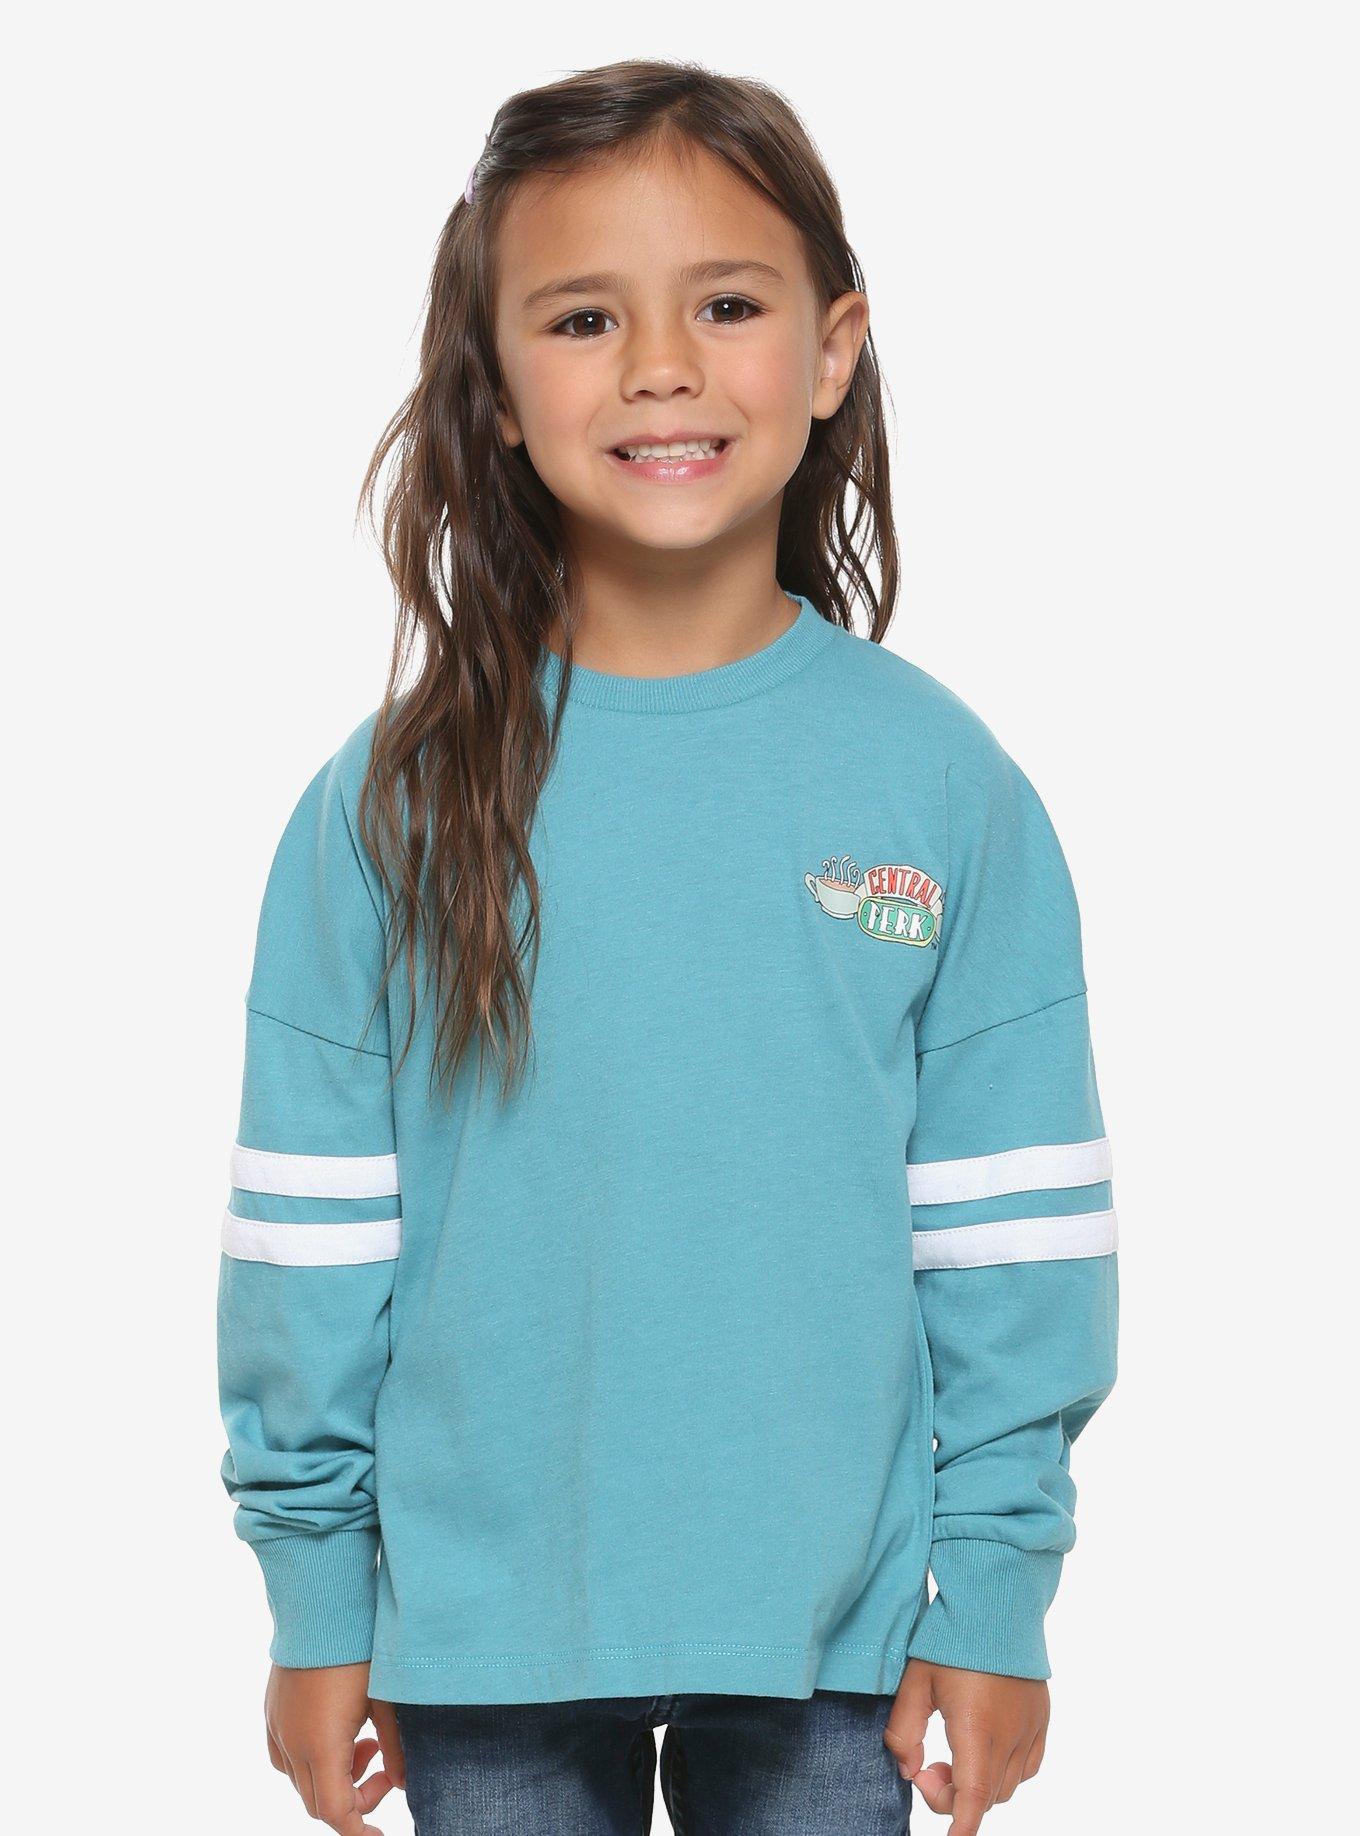 Friends Central Perk Toddler Hype Jersey - BoxLunch Exclusive, BLUE, hi-res